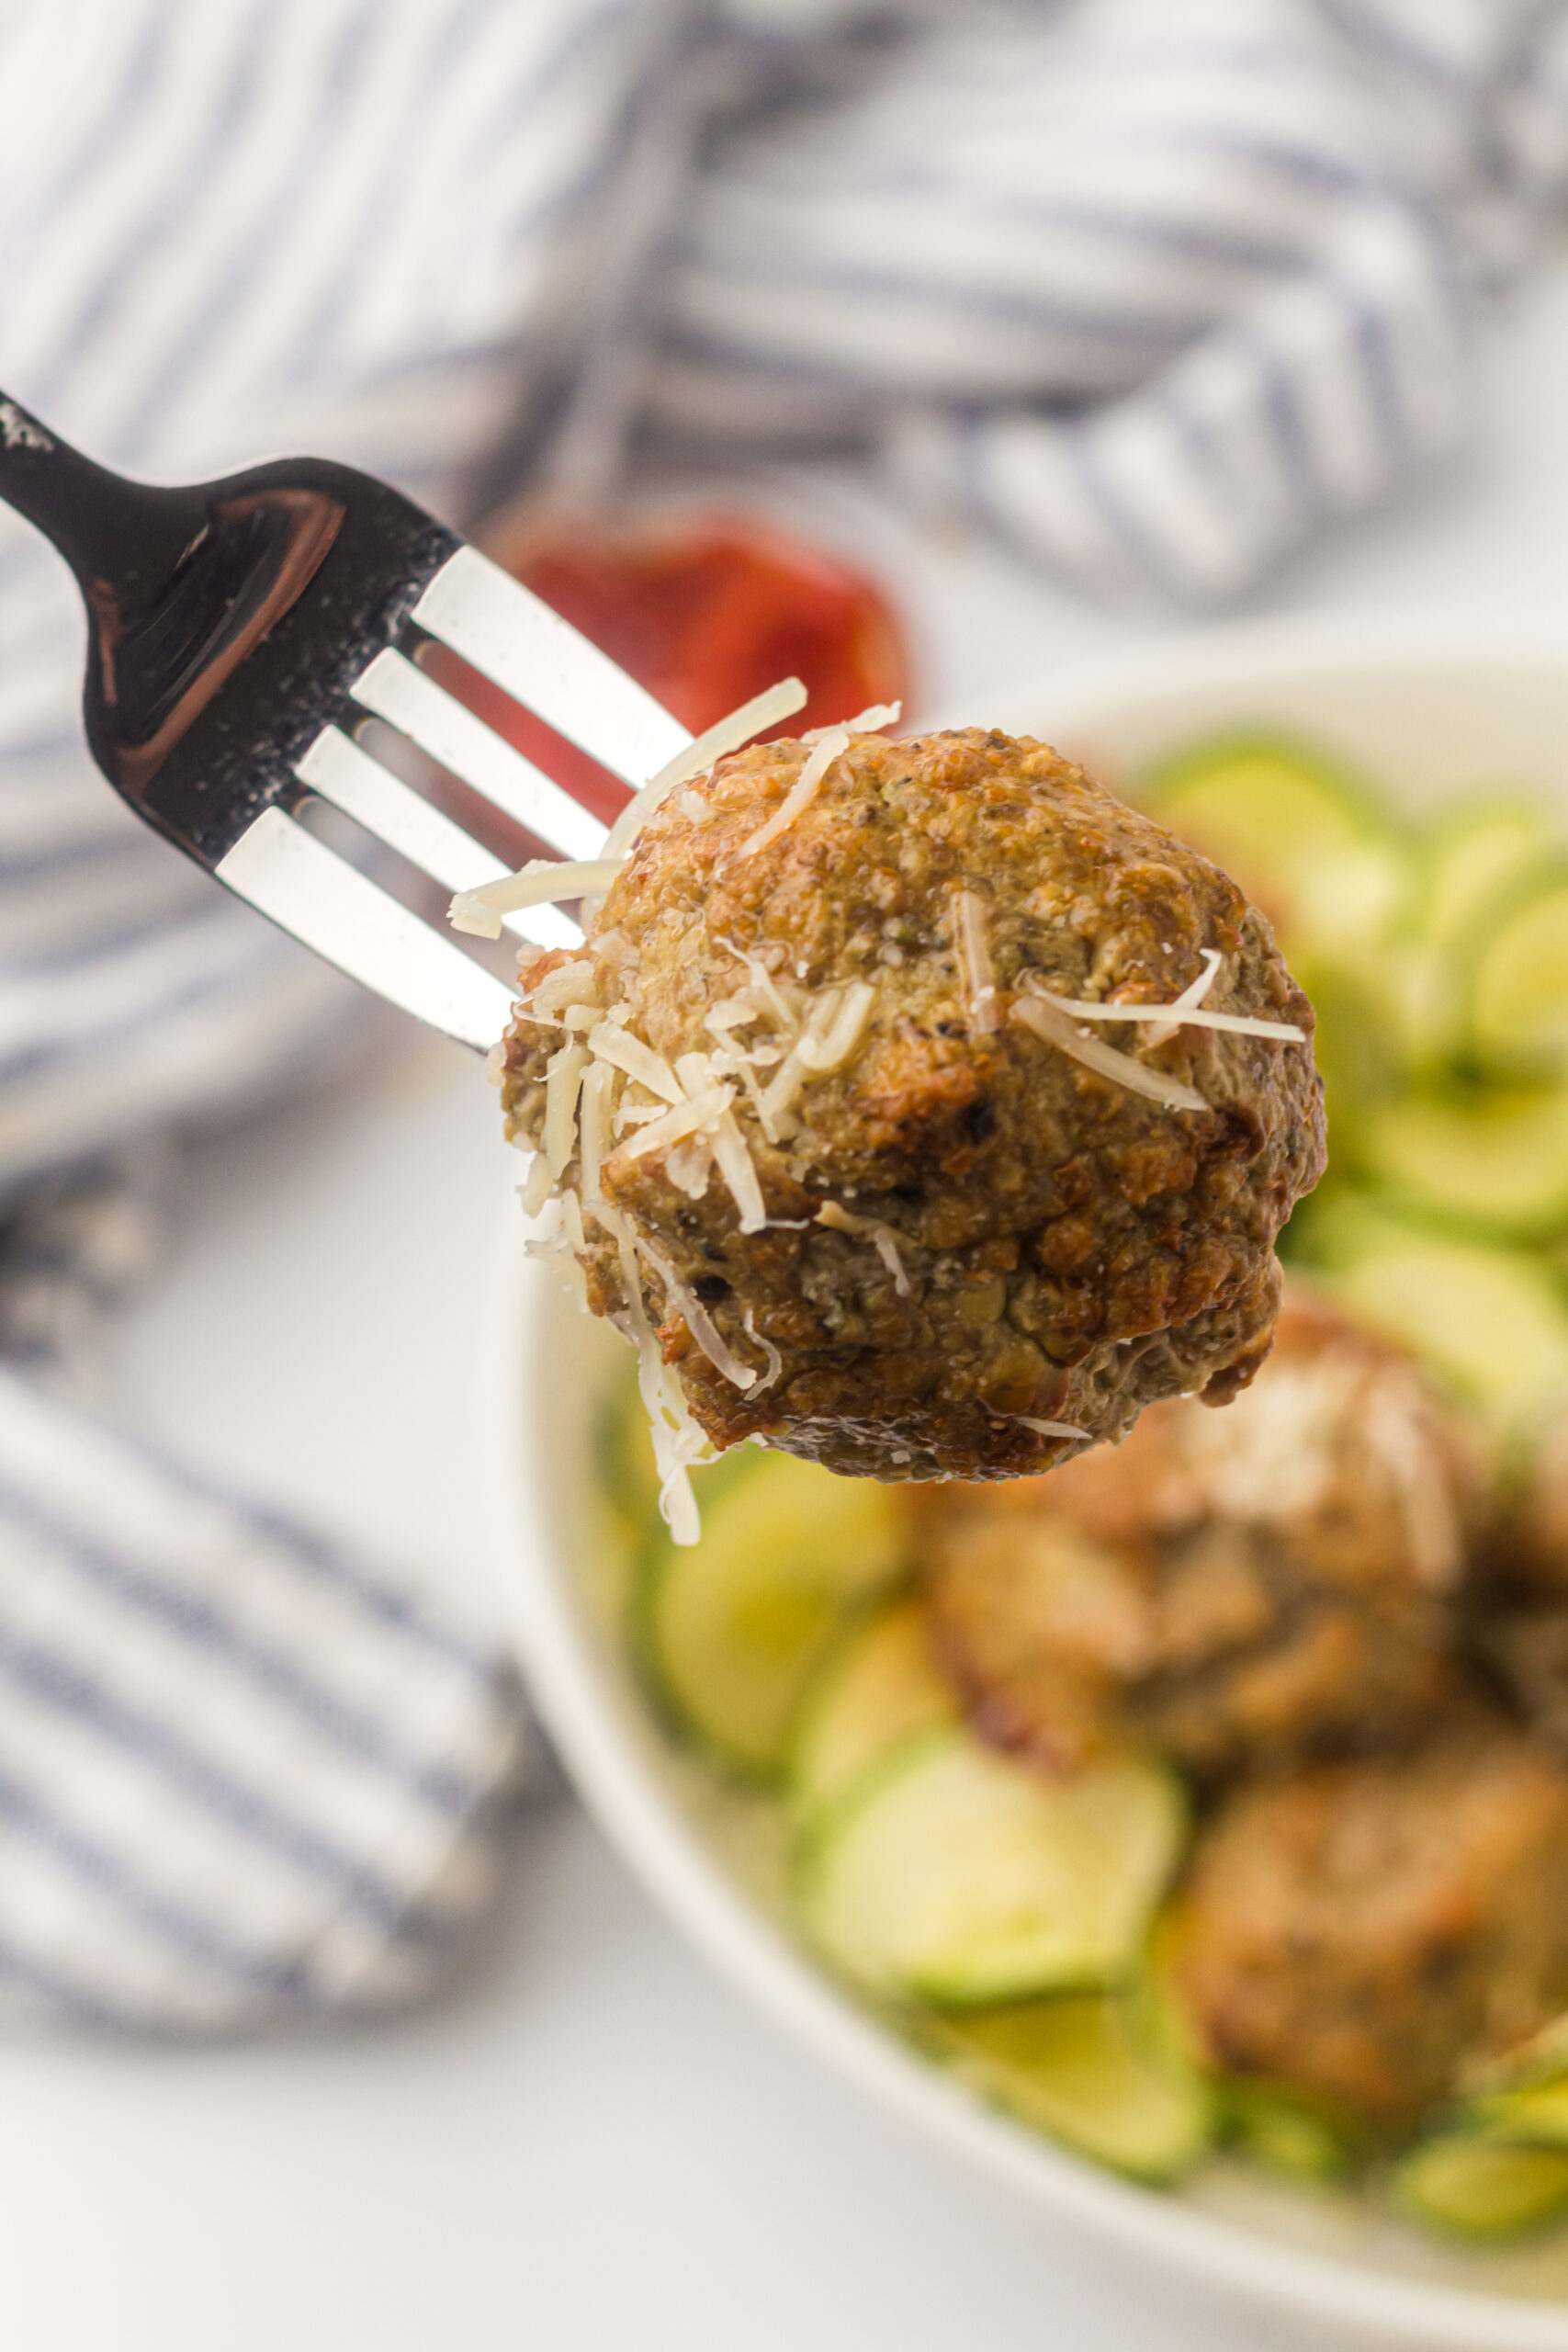 Meatballs and Courgetti